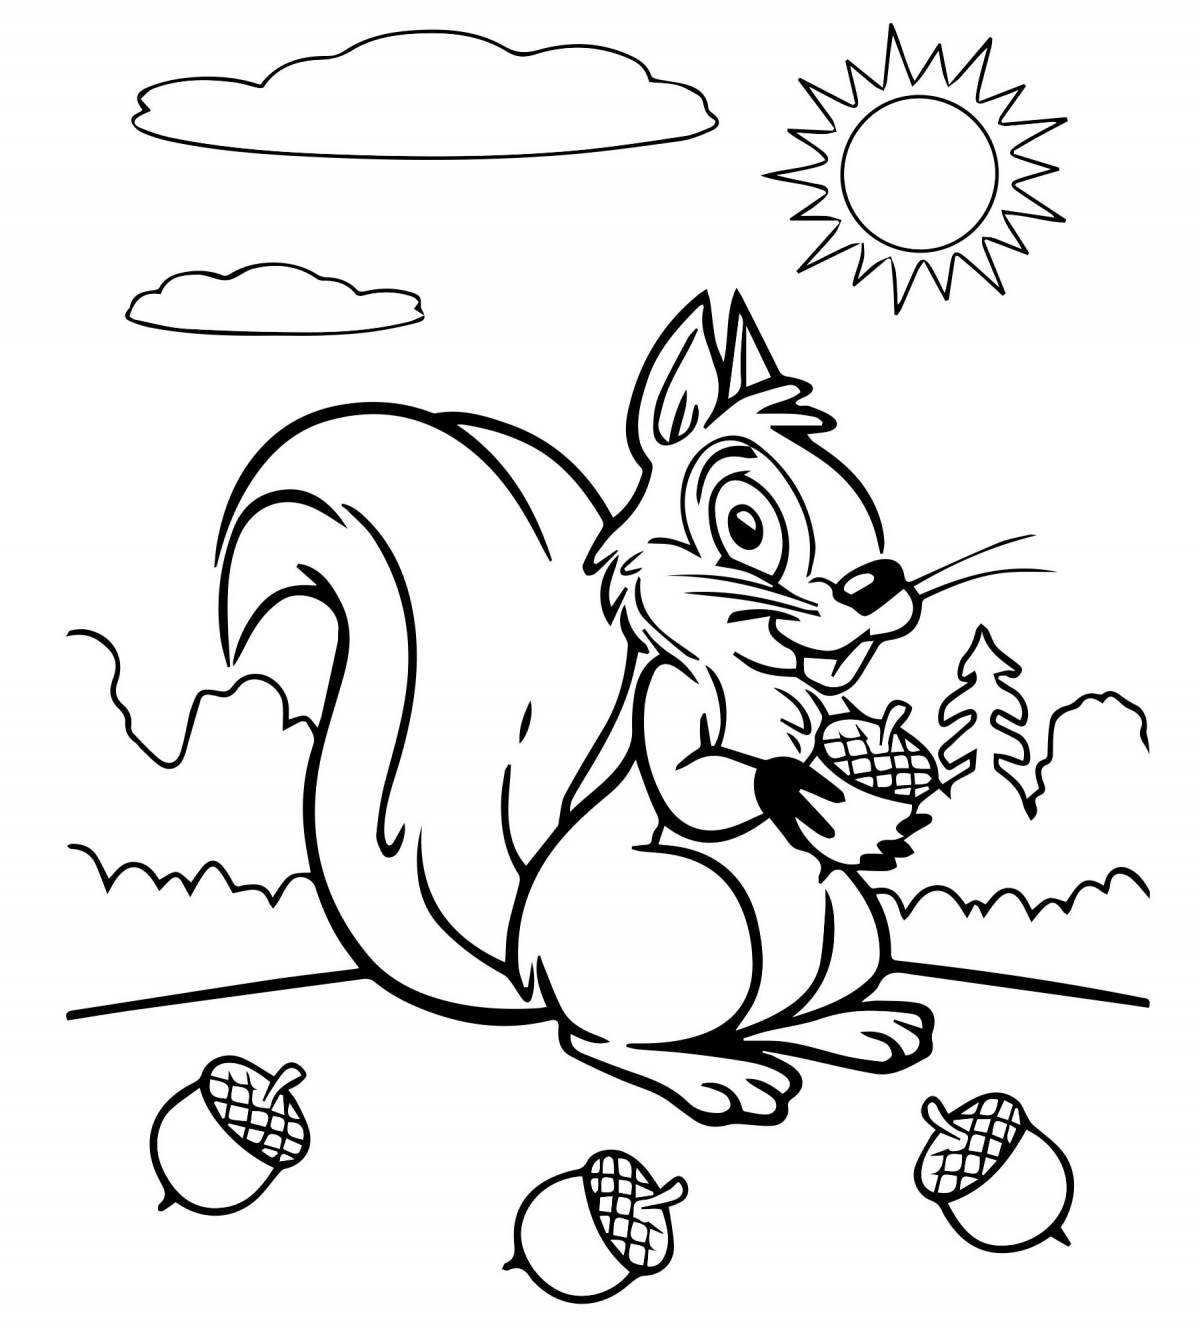 Outstanding squirrel coloring book for kids